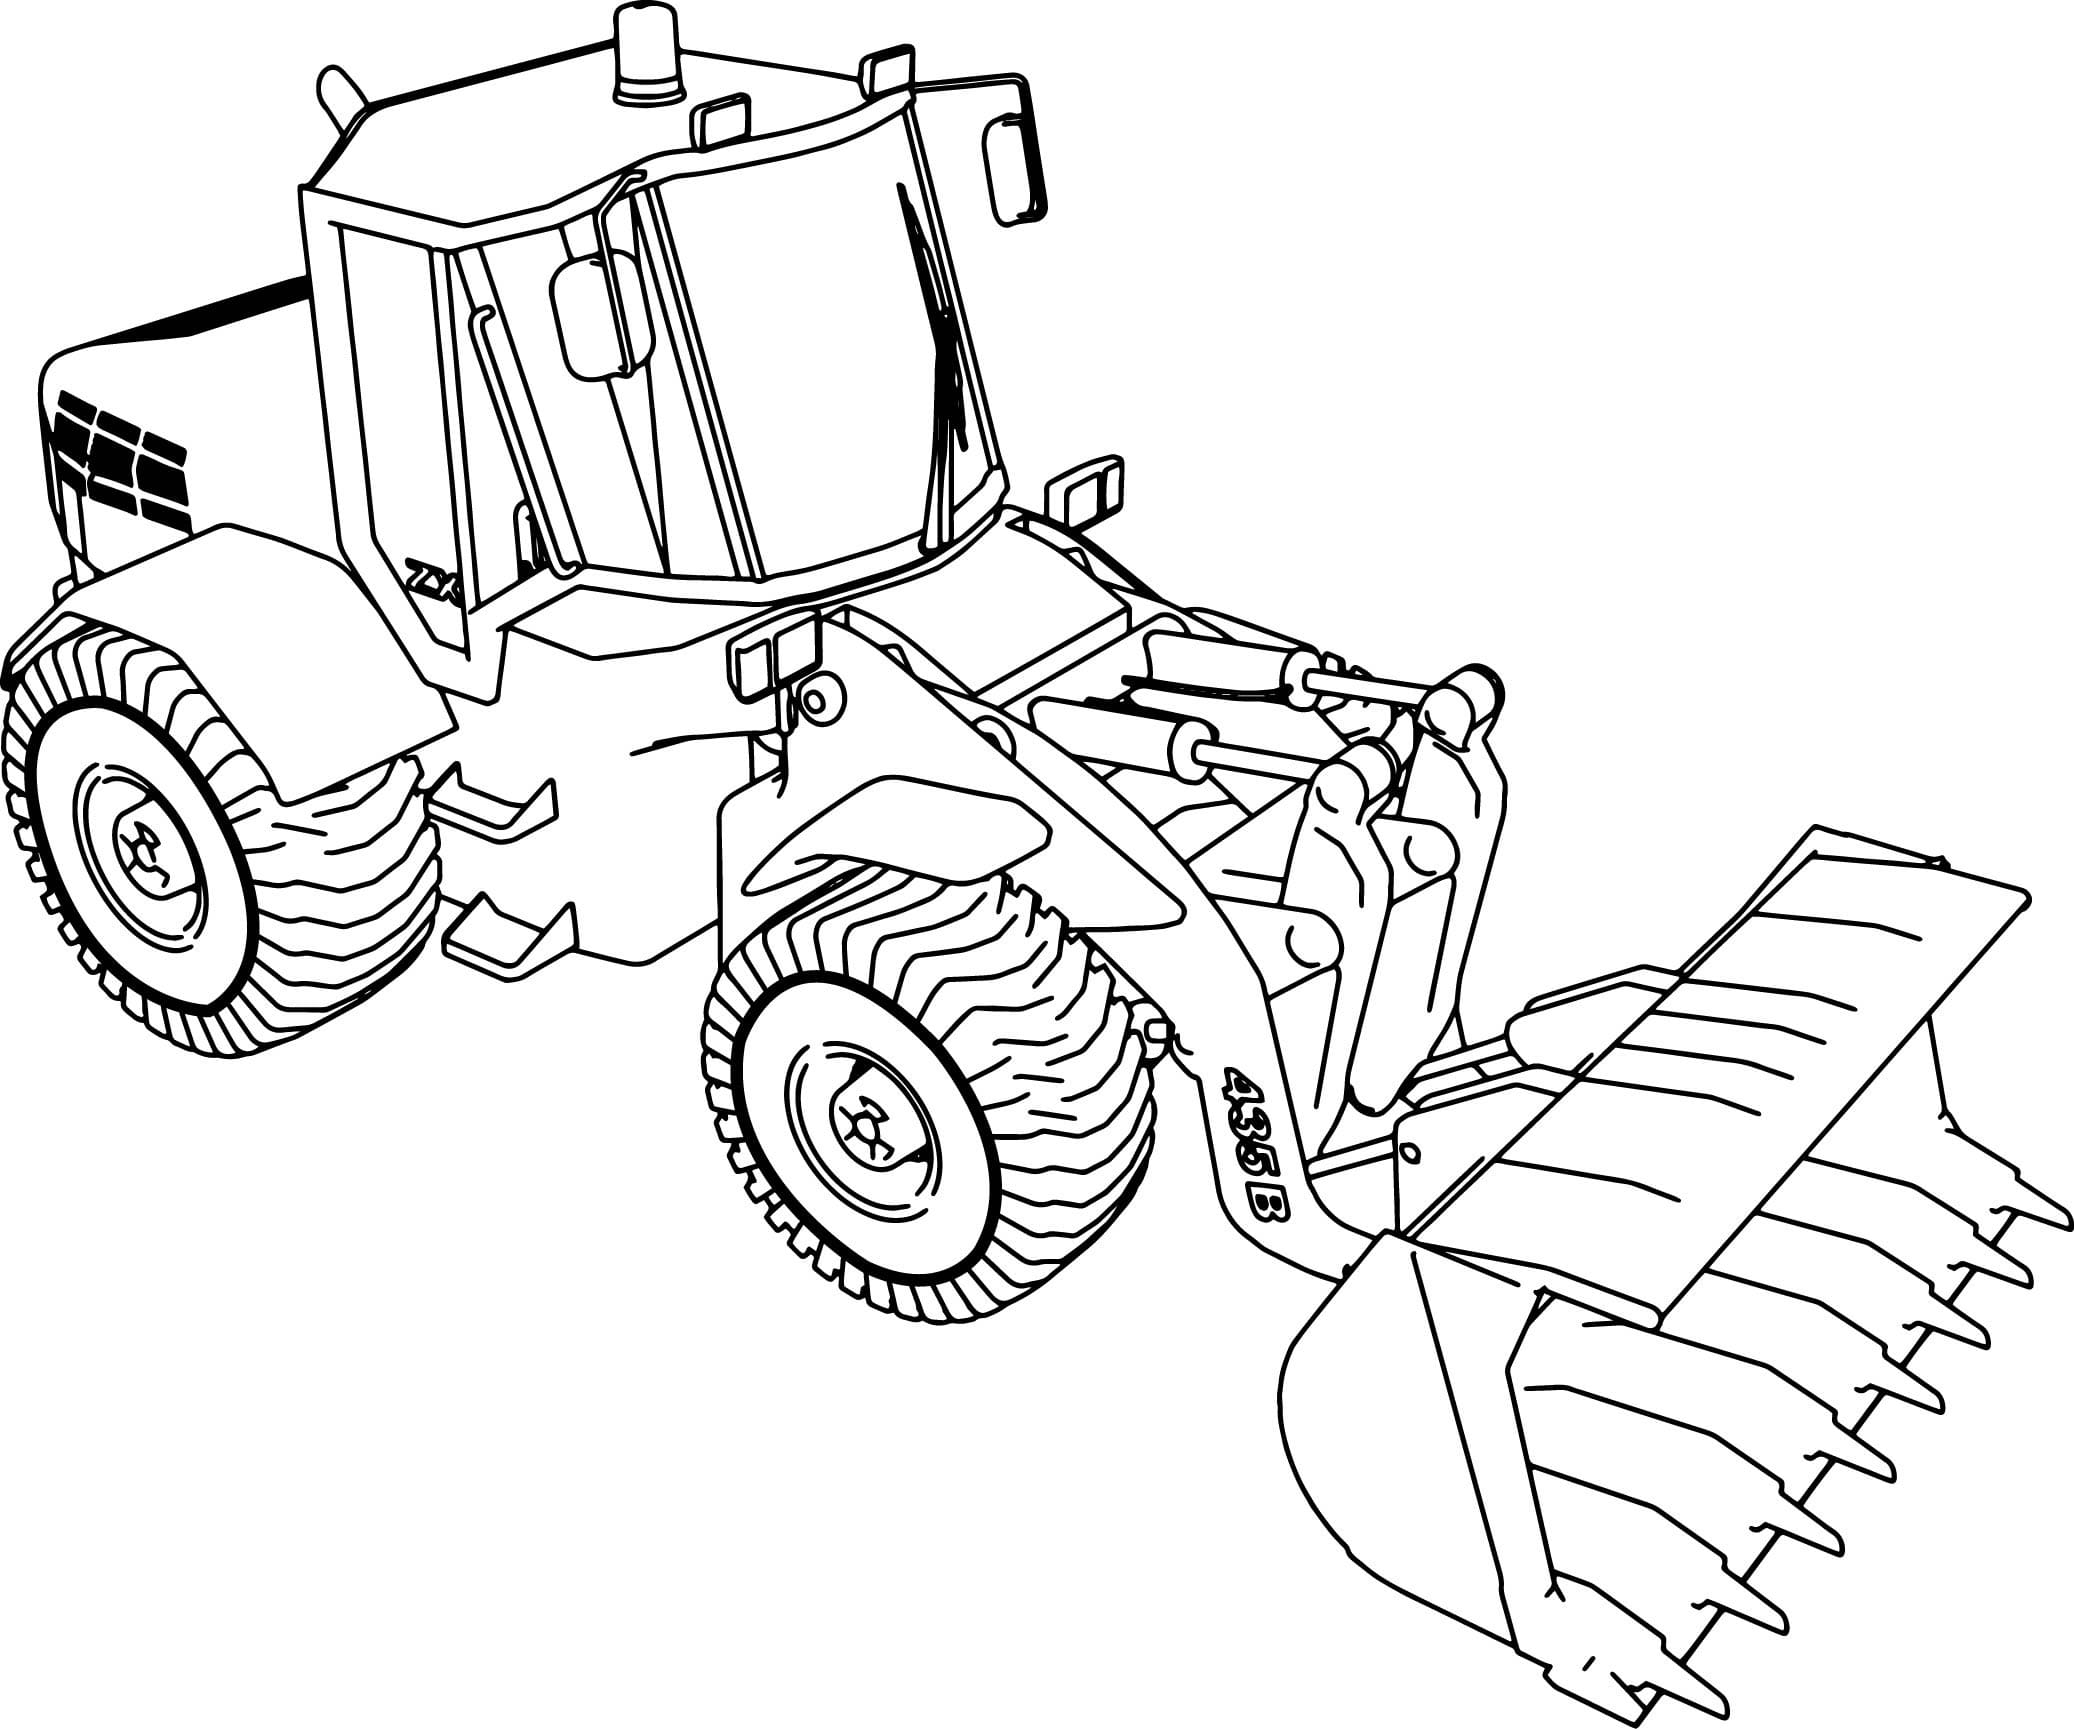 Coloring page Tractor Detailed tractor for boys 9-10 years old